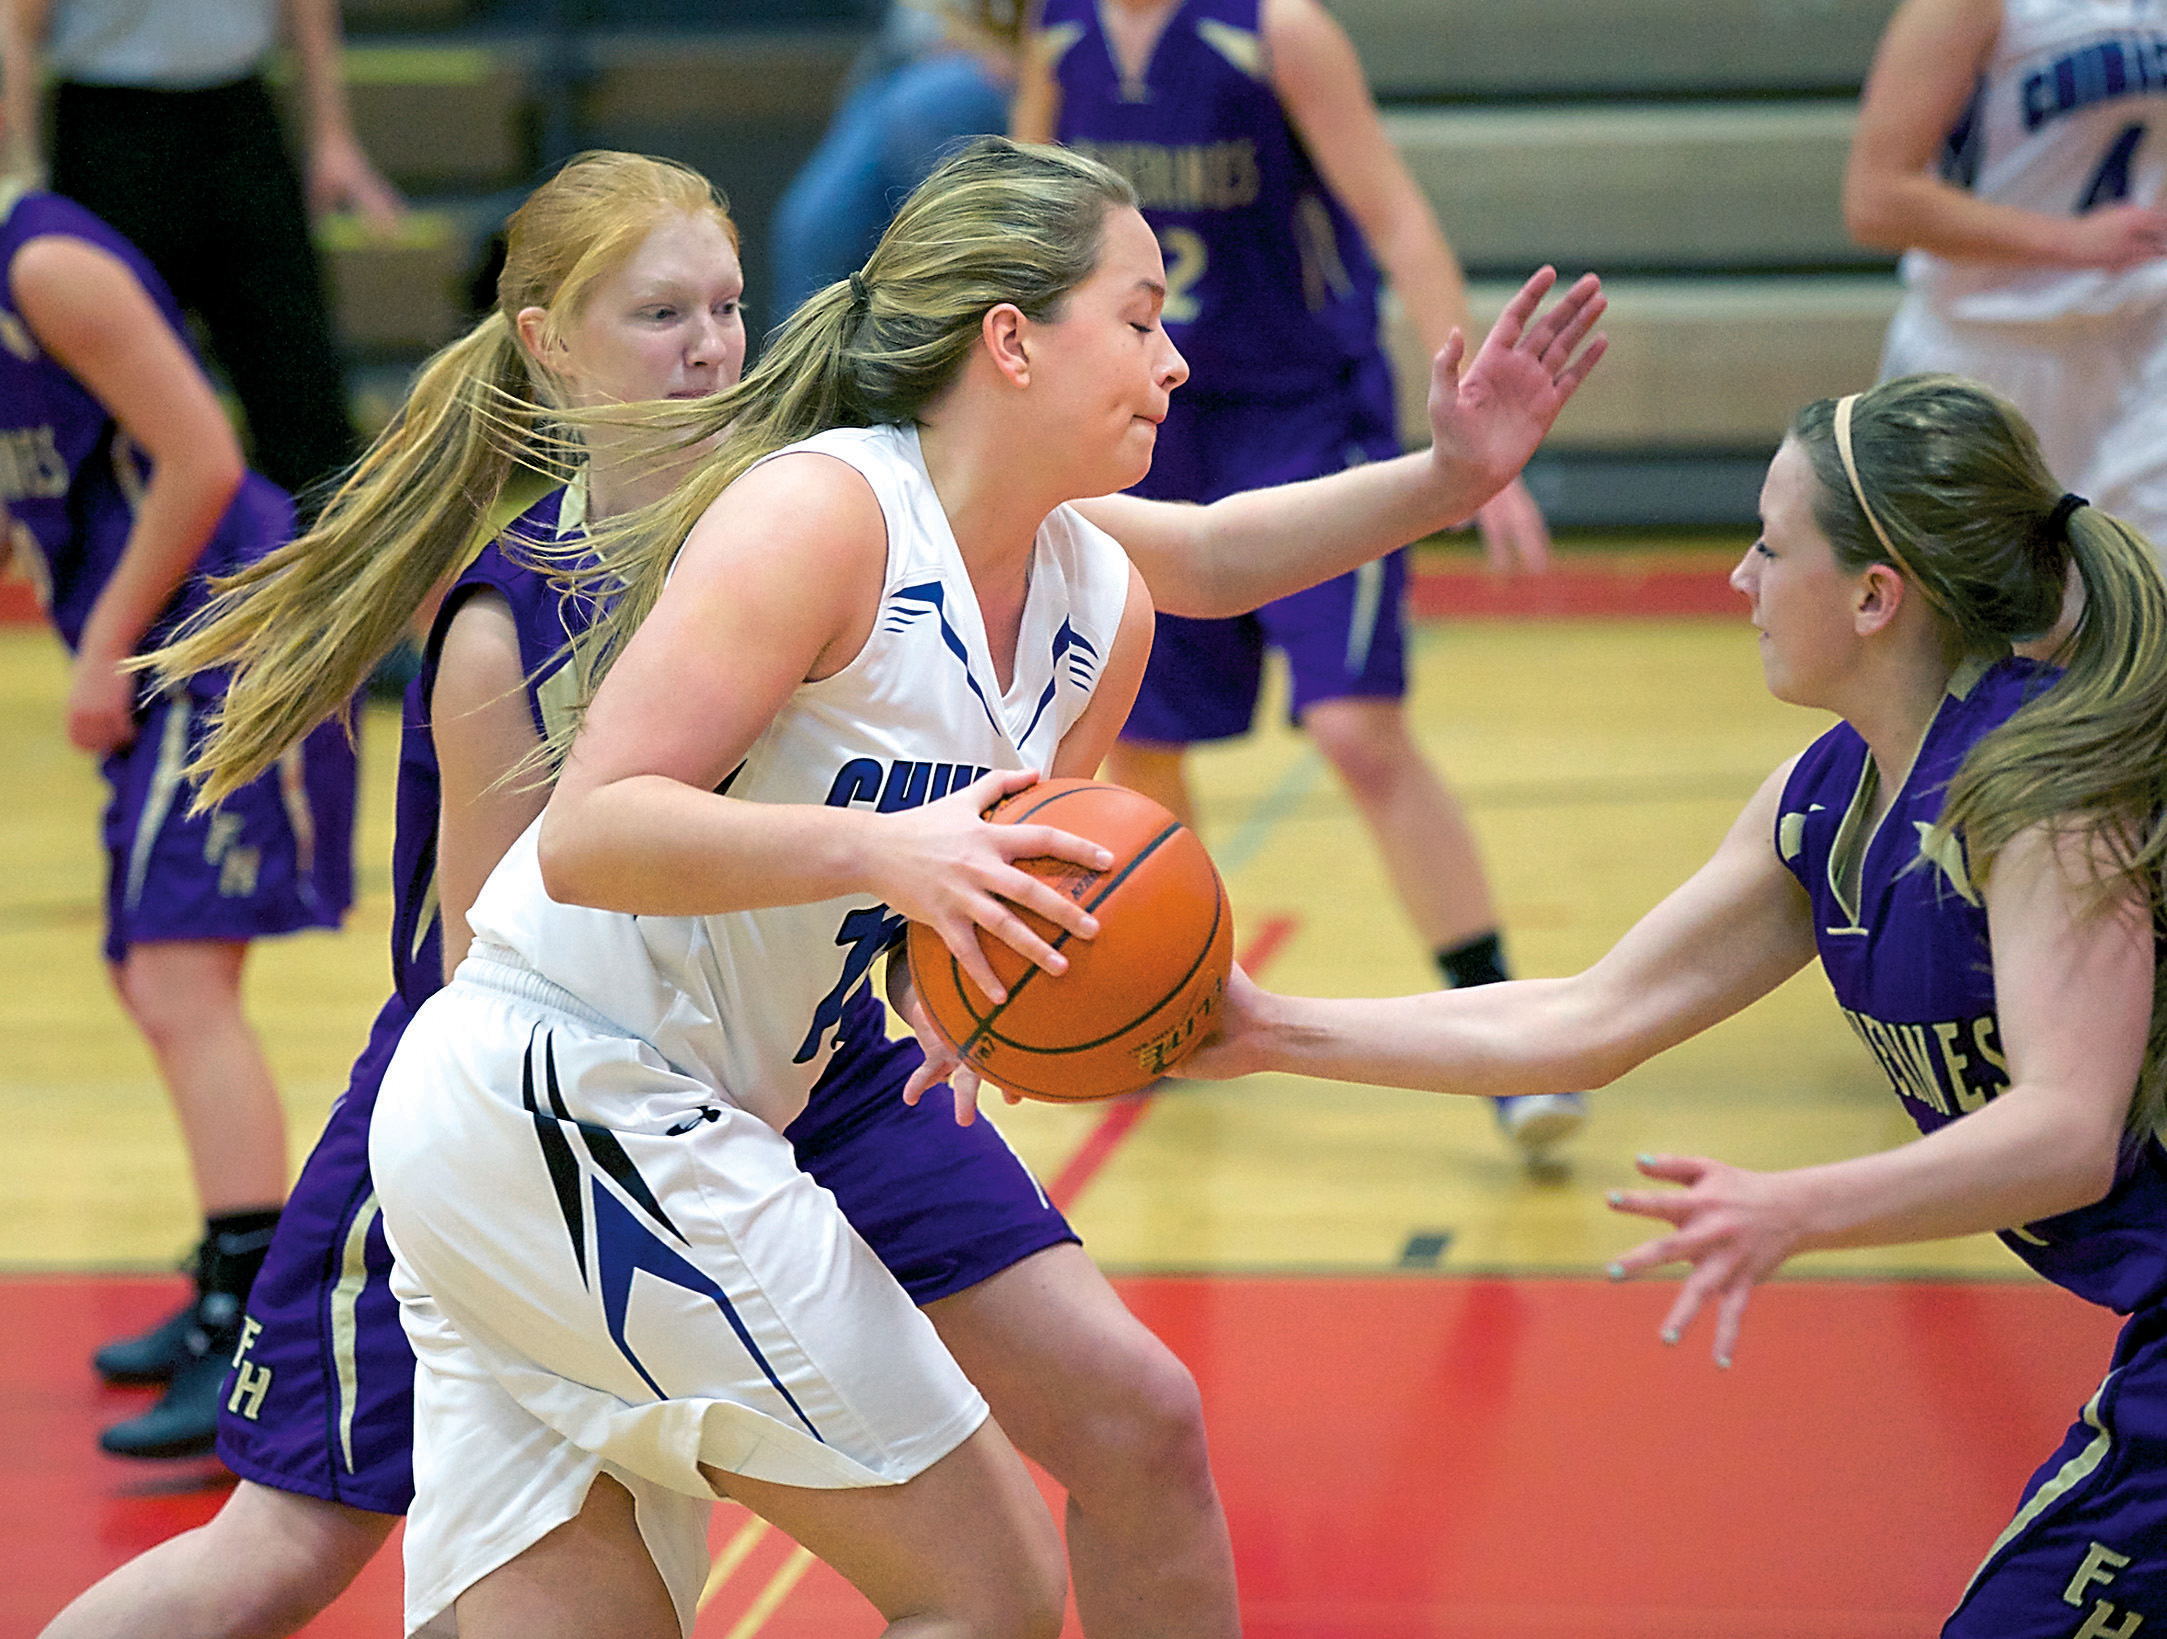 Chimacum's Lauren Thacker blasts through the defense of Friday Harbor's Taylor Turnbull during the opening game of the Crush in the Slush tournament. Steve Mullensky/for Peninsula Daily News